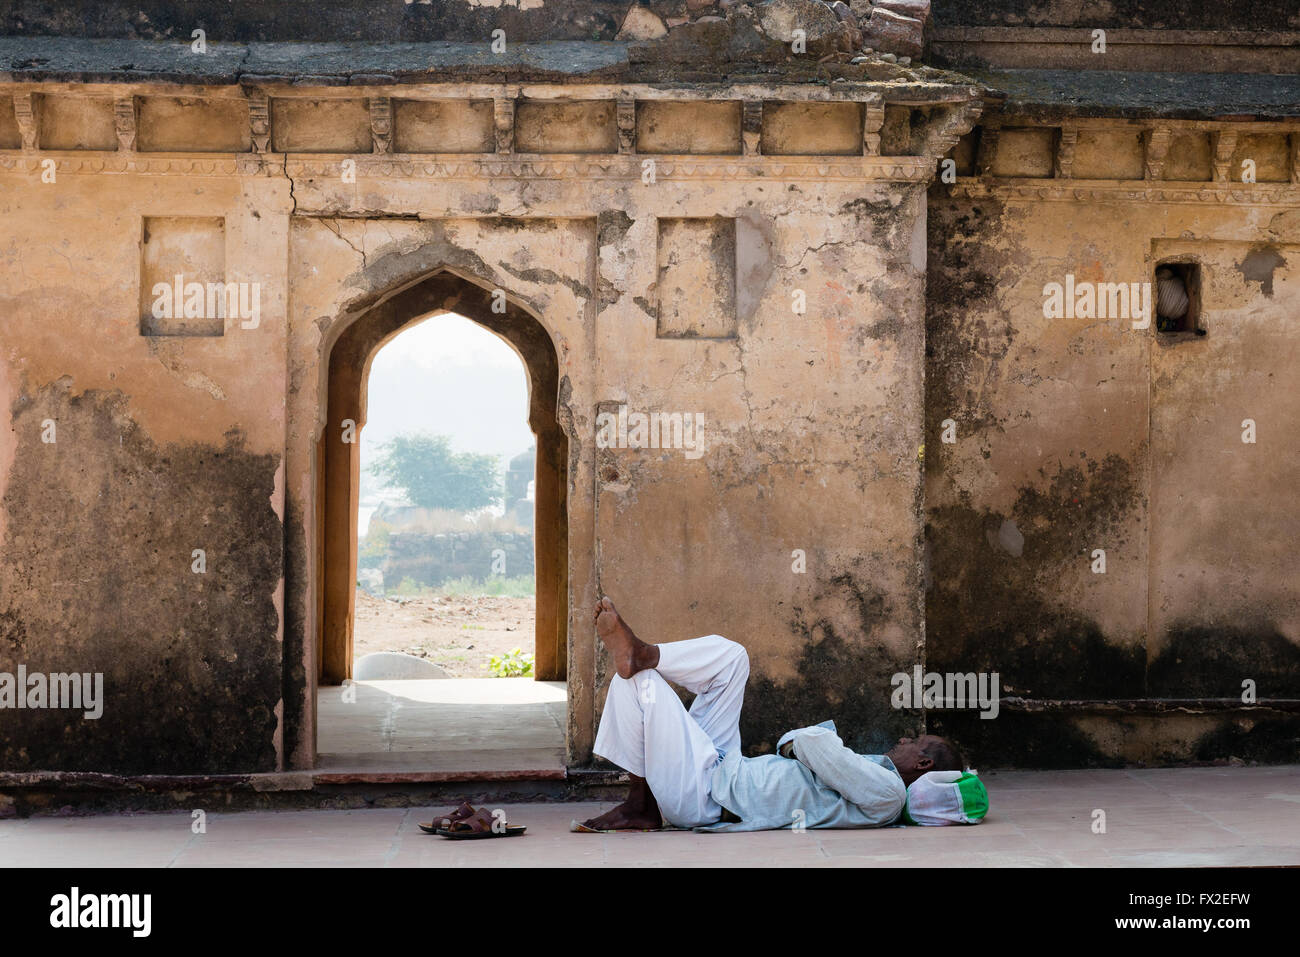 Indian man sleeping in ruins of monument Stock Photo